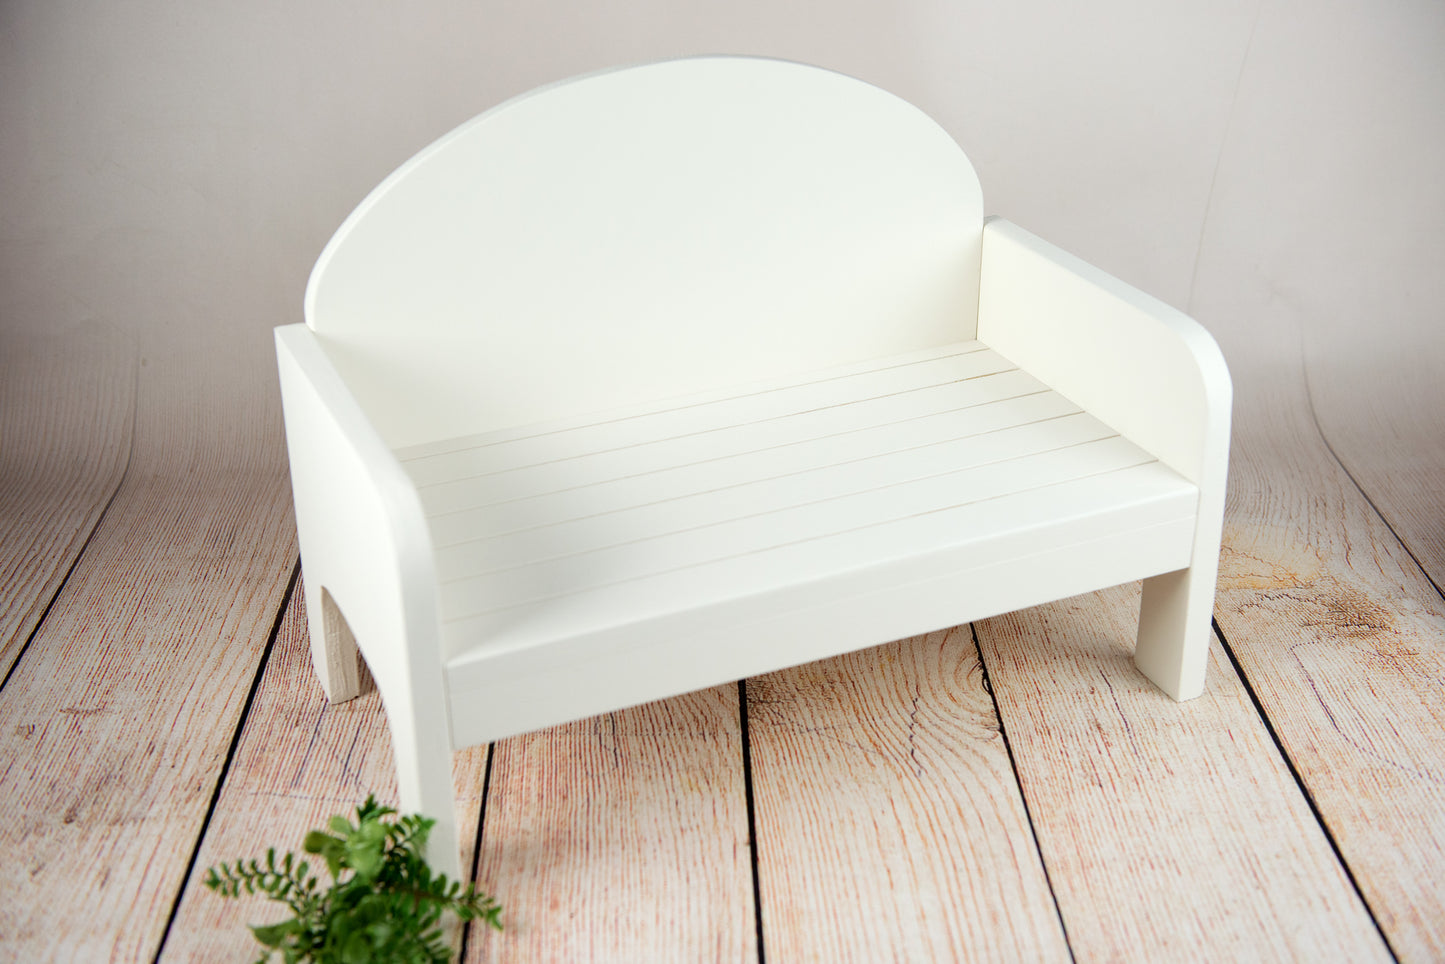 Handmade white rustic wooden bench for newborn photography, cozy curve design, ideal for newborn photographers